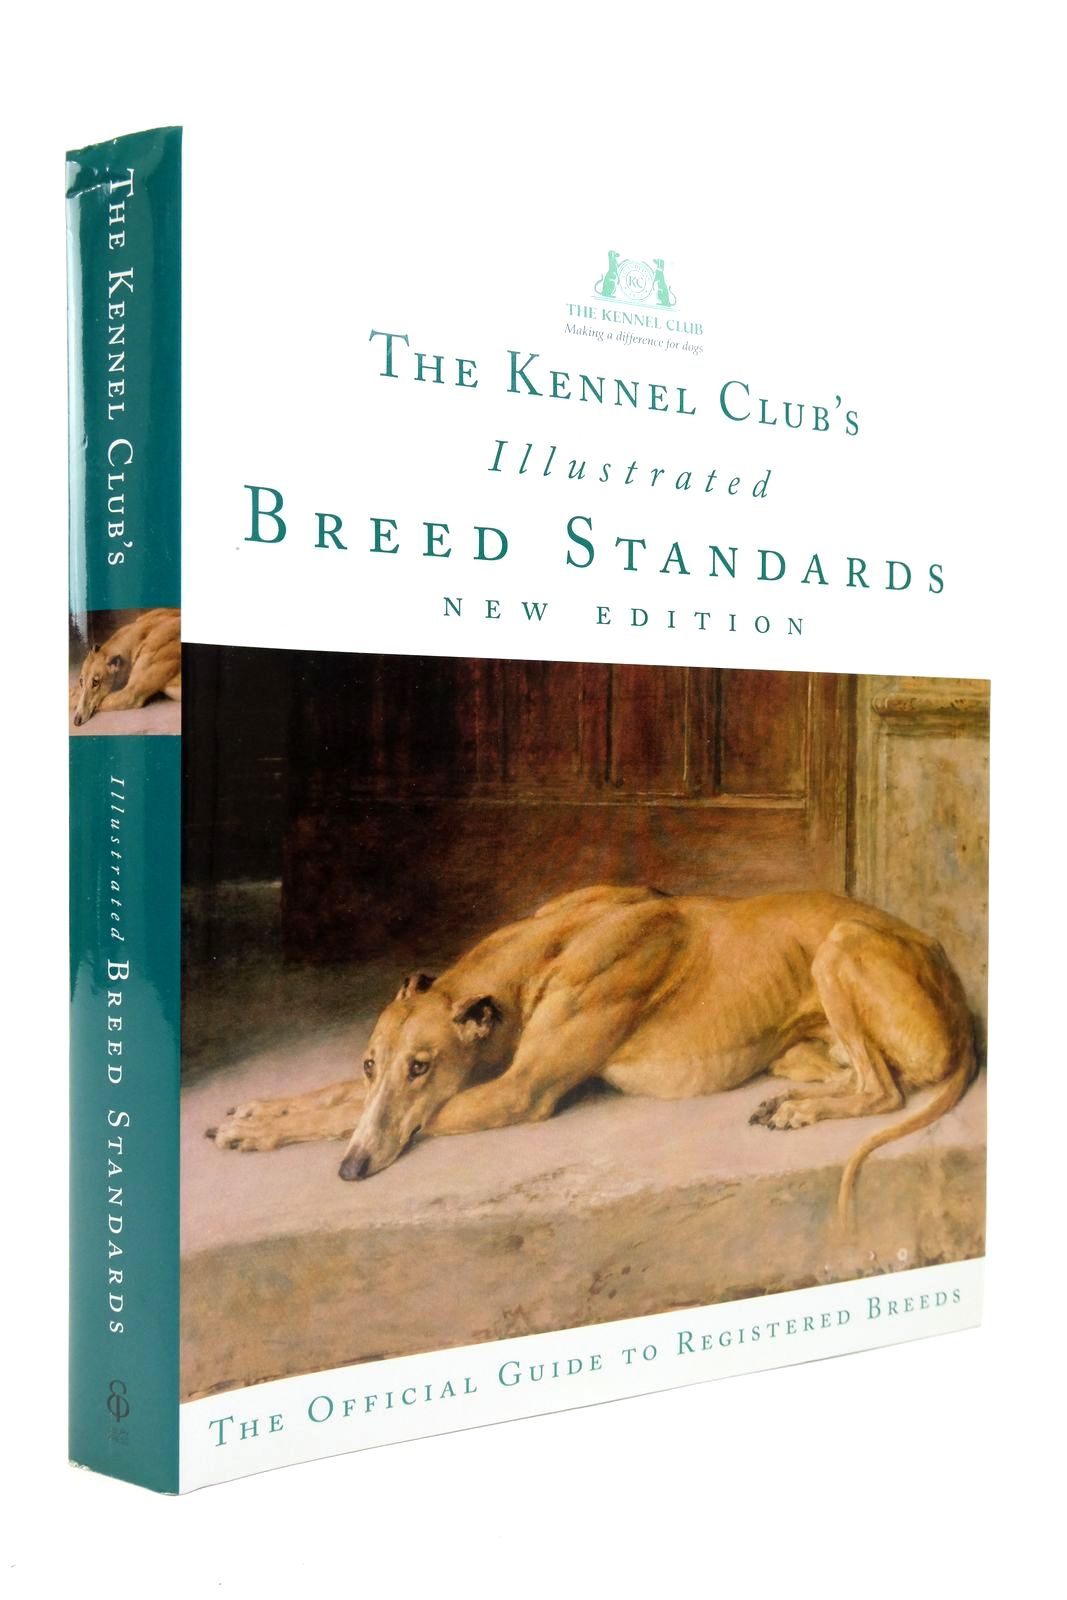 Photo of THE KENNEL CLUB'S ILLUSTRATED BREED STANDARDS FOURTH EDITION published by Ebury Press (STOCK CODE: 2140746)  for sale by Stella & Rose's Books